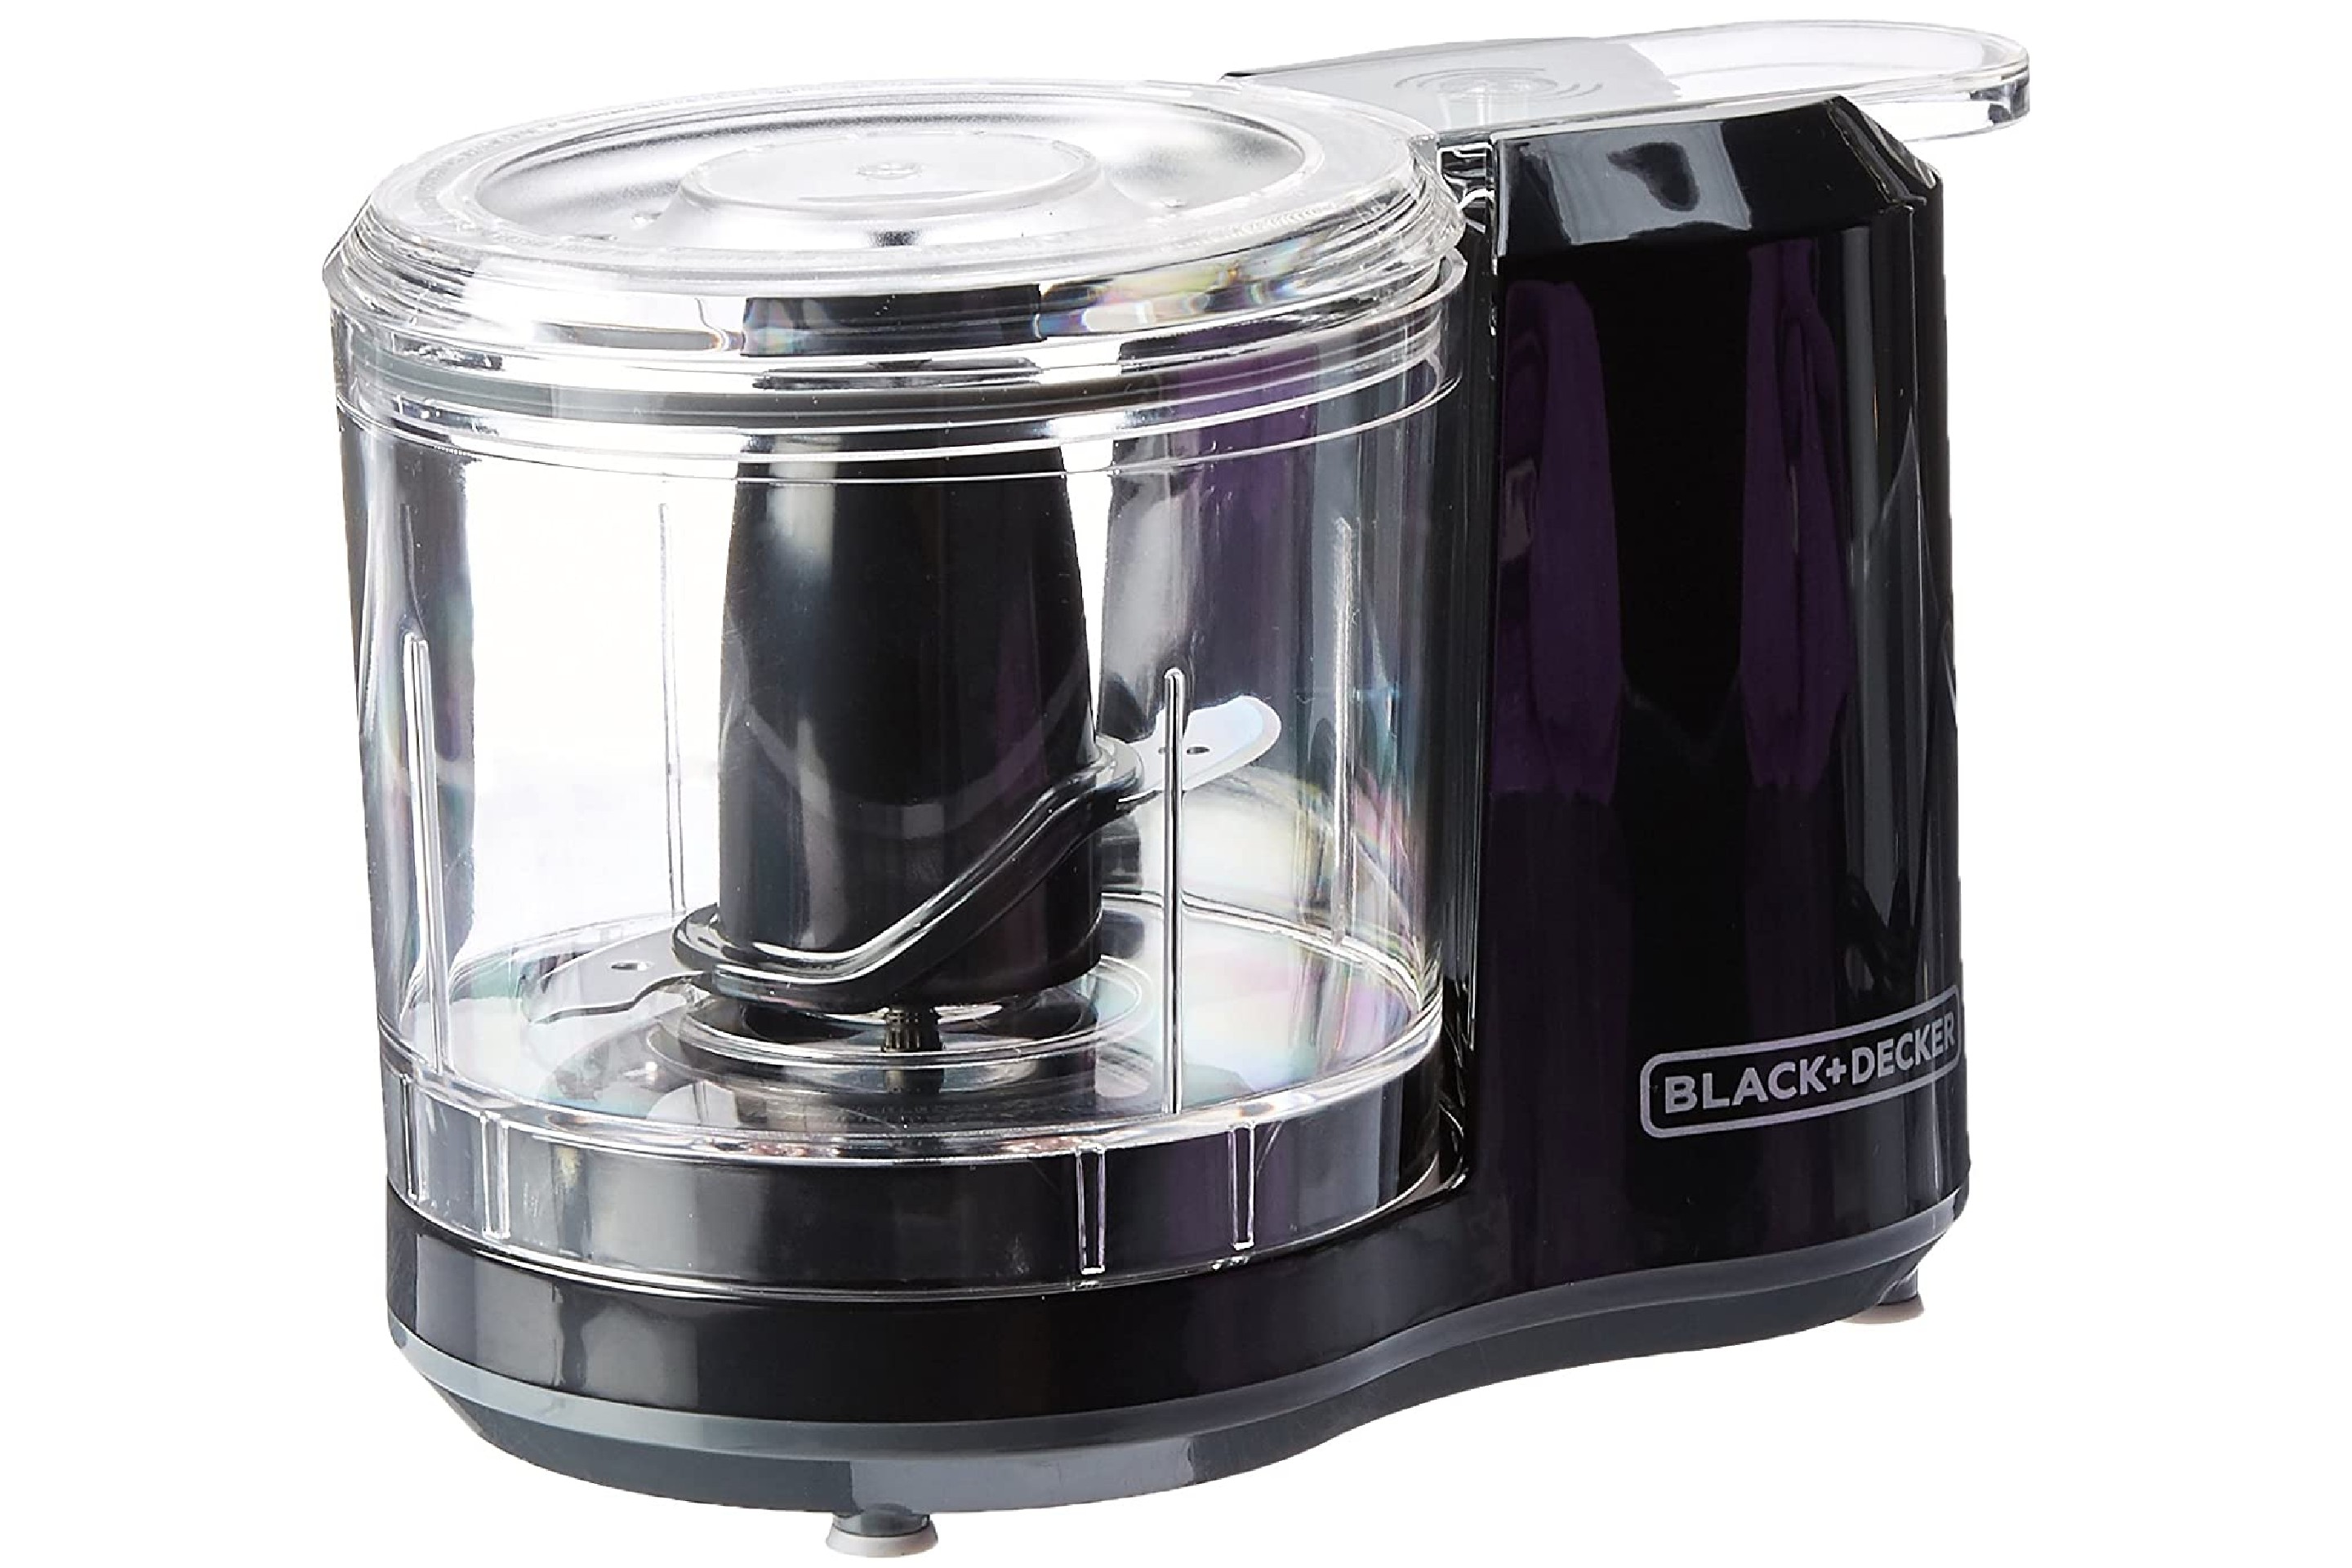 The Best Small Food Processors